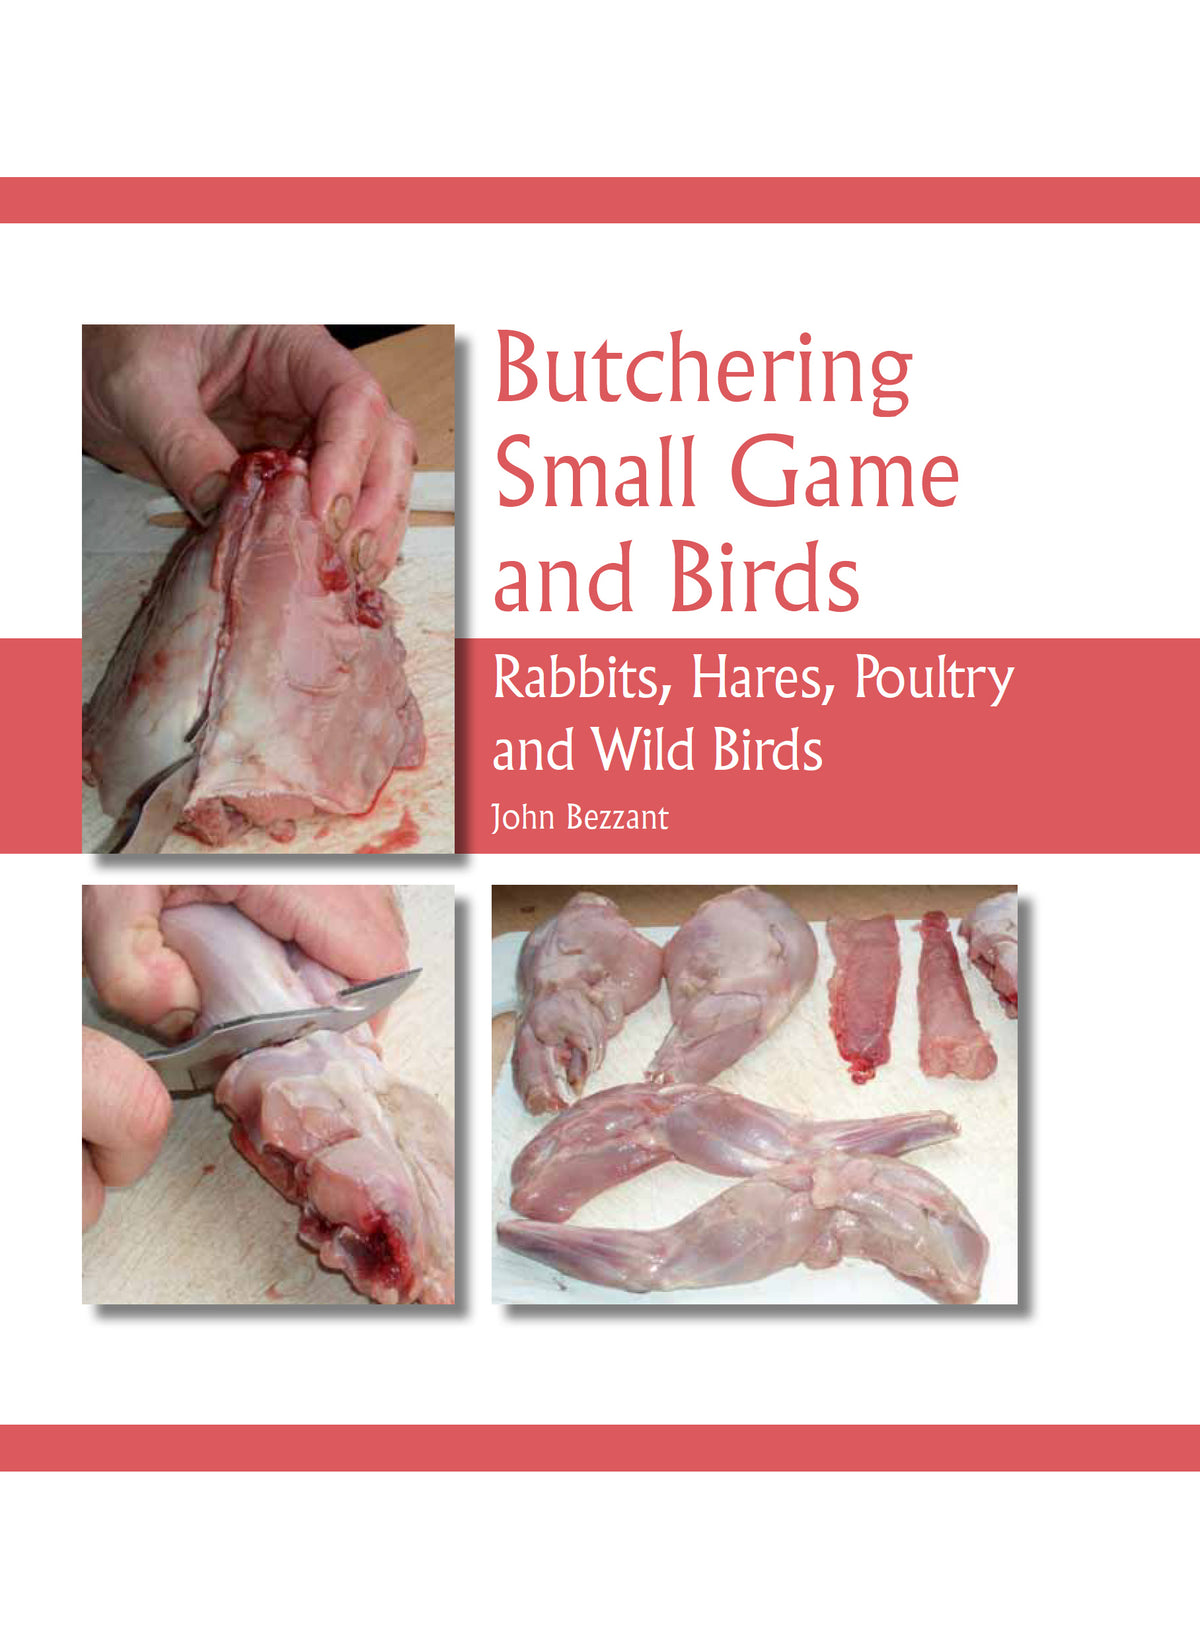 Butchering Small Game and Birds